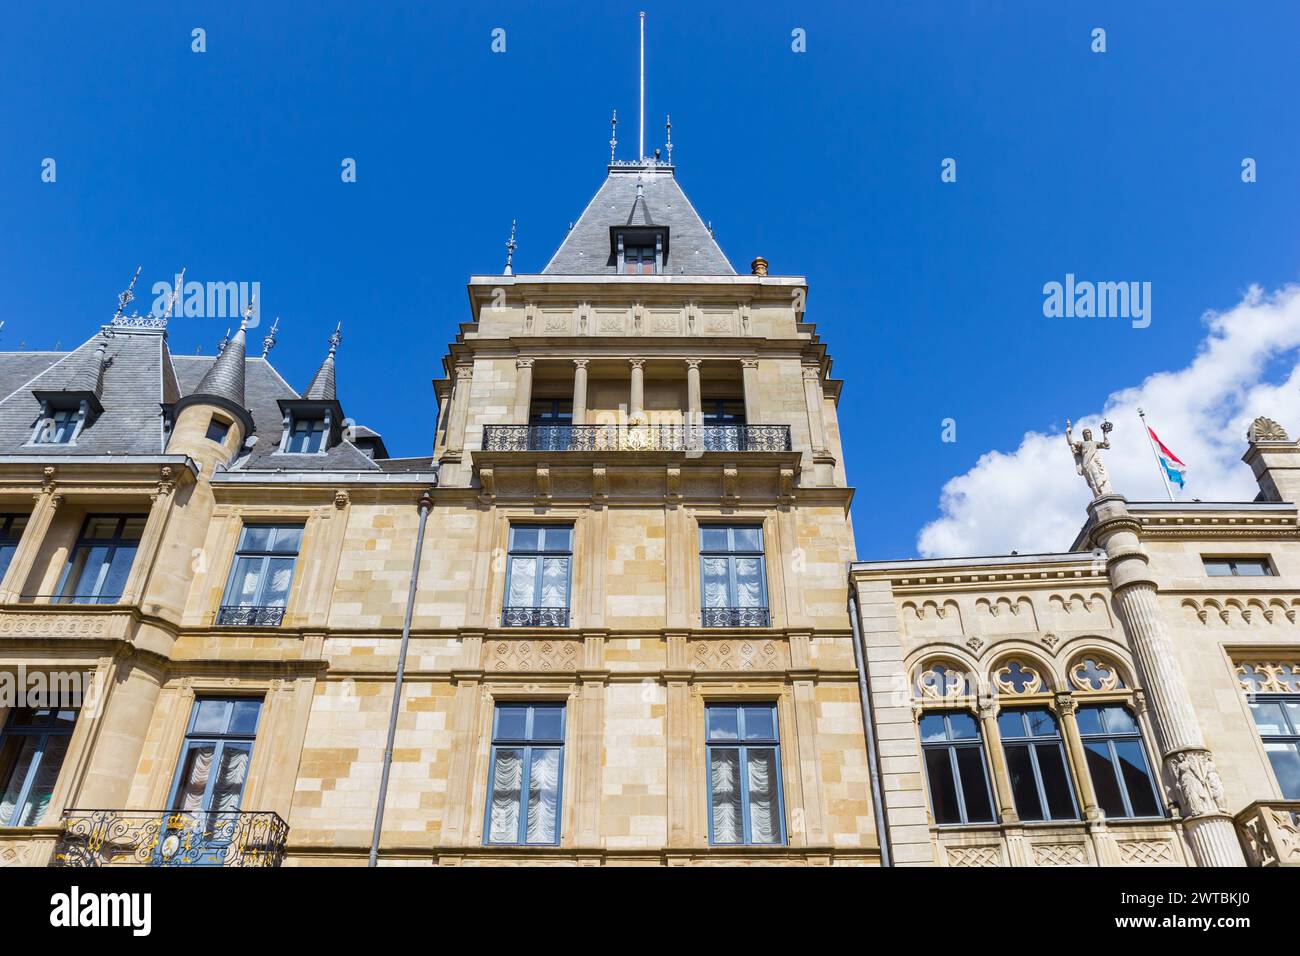 Facade of the historic Grand Ducal Palace in Luxembourg city Stock Photo